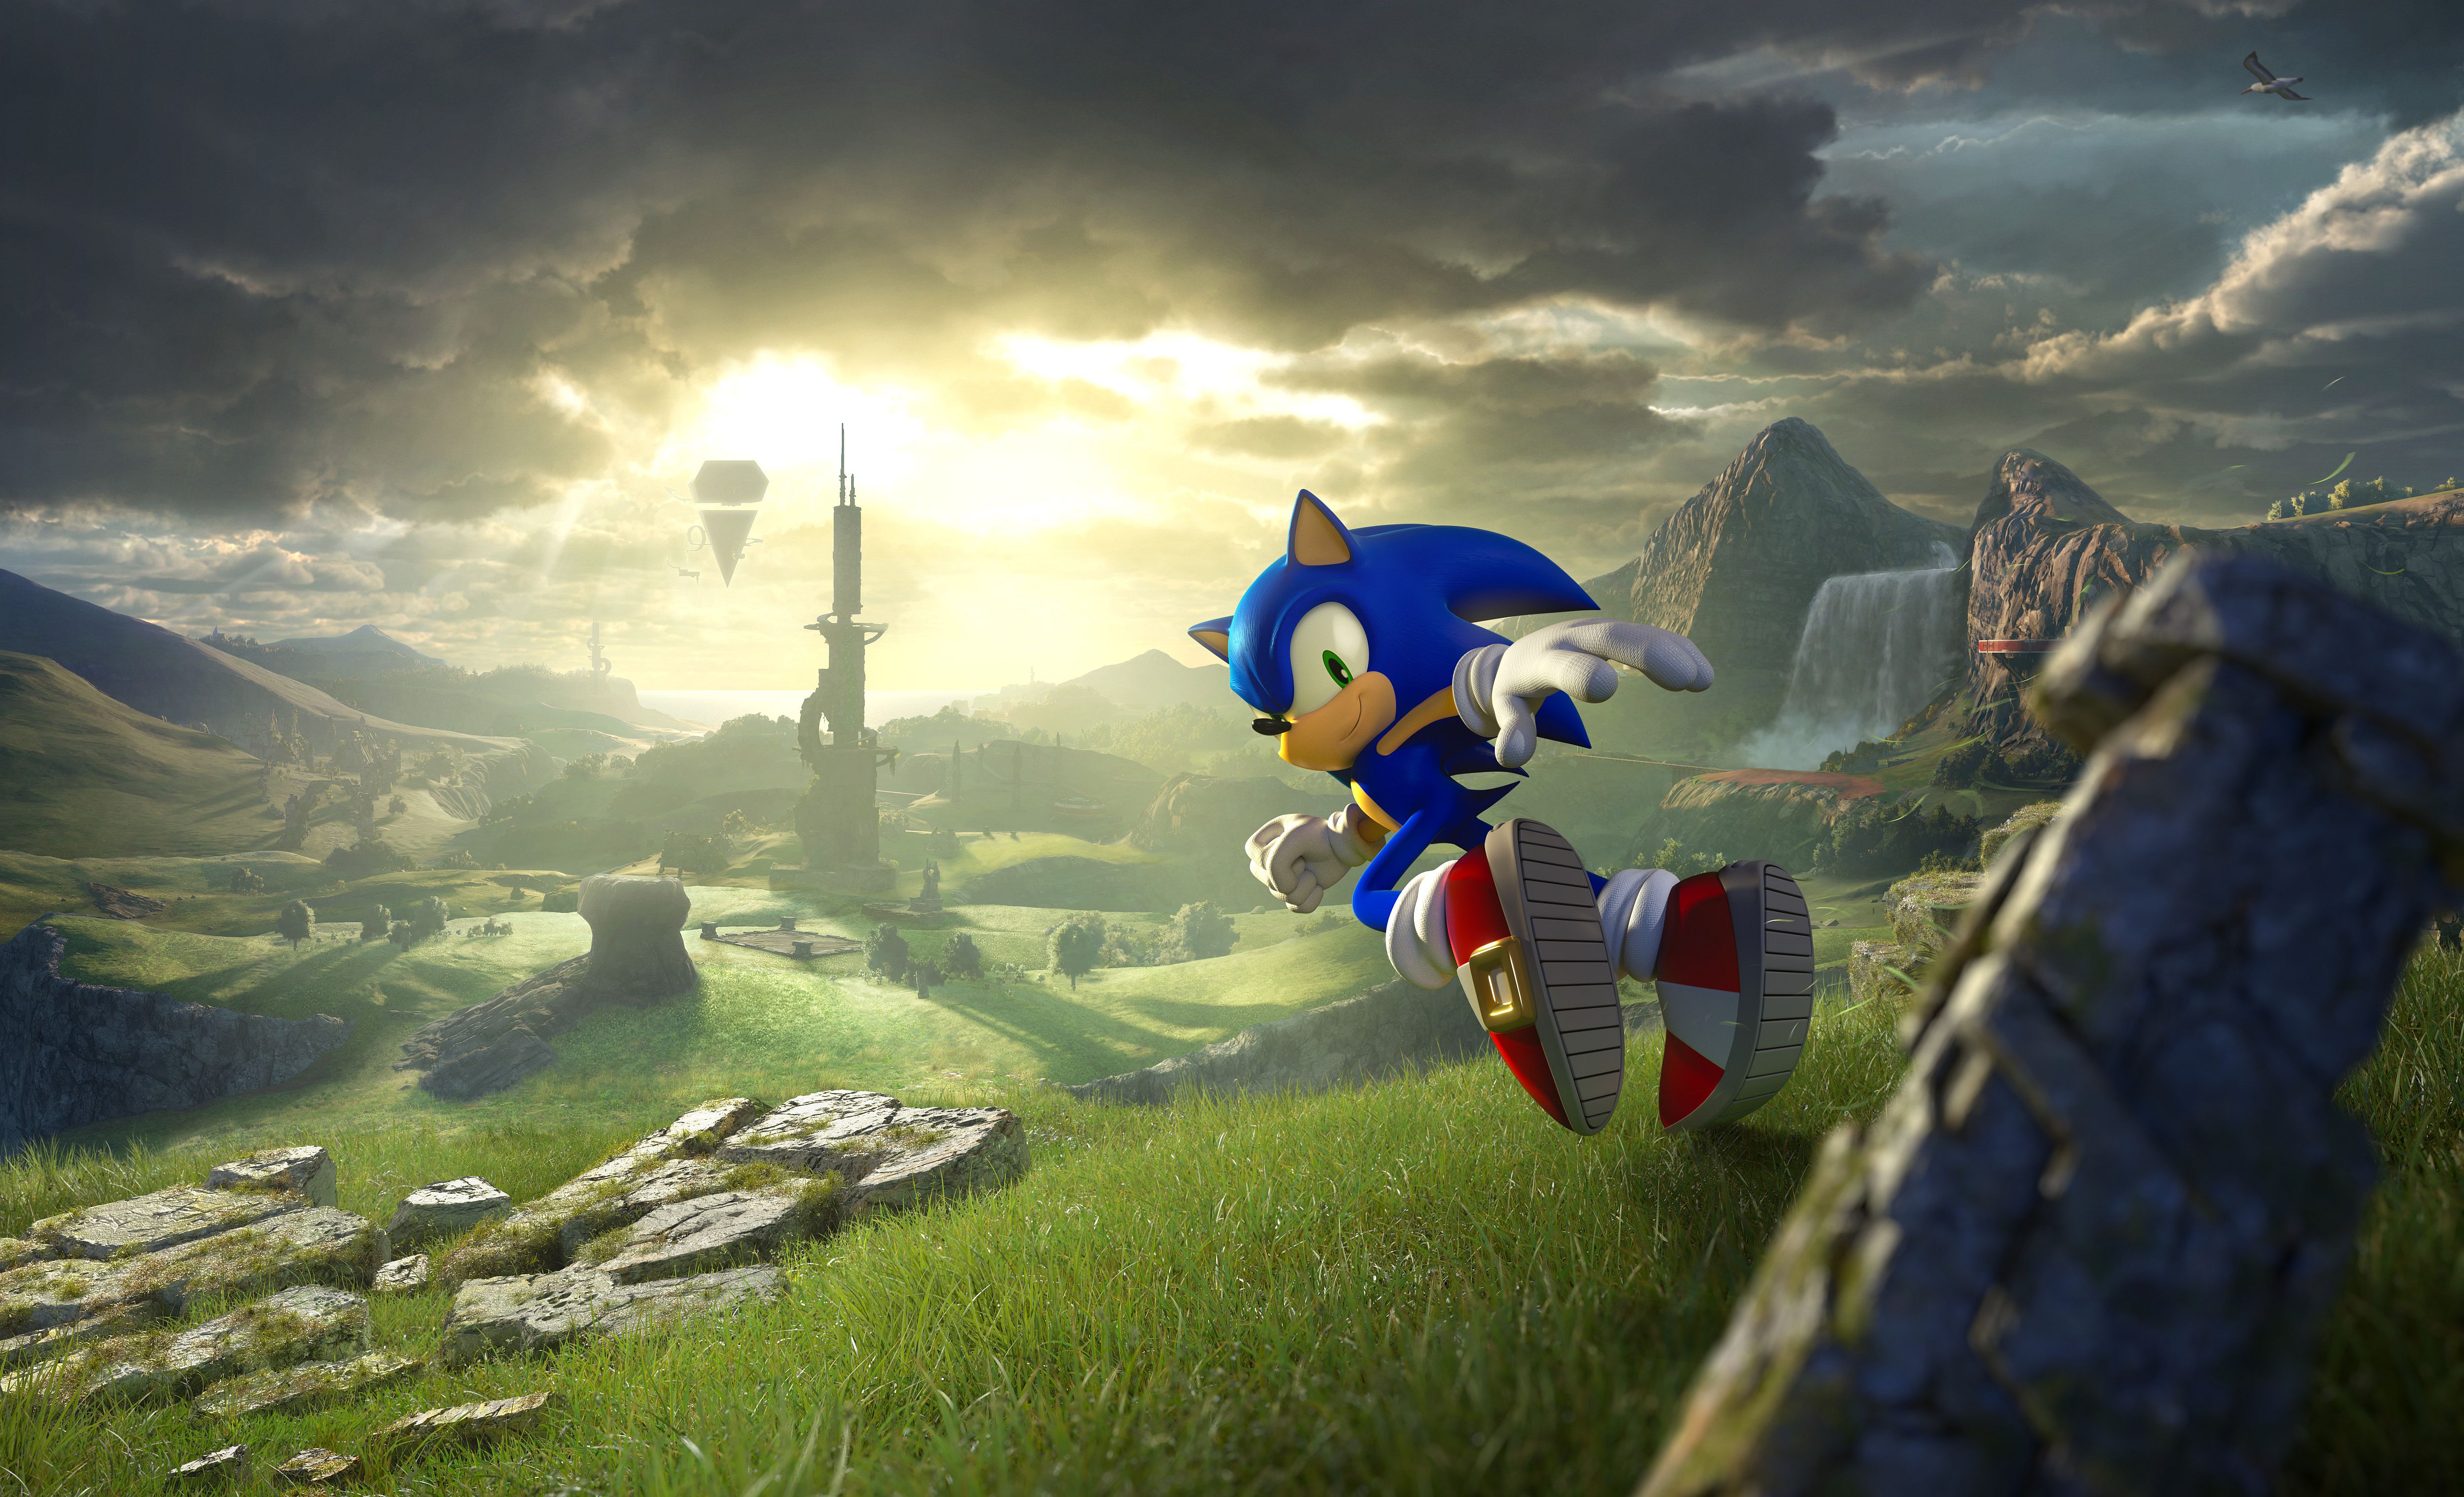 Sonic Frontiers free update adds Photo Mode, newly added features, and more